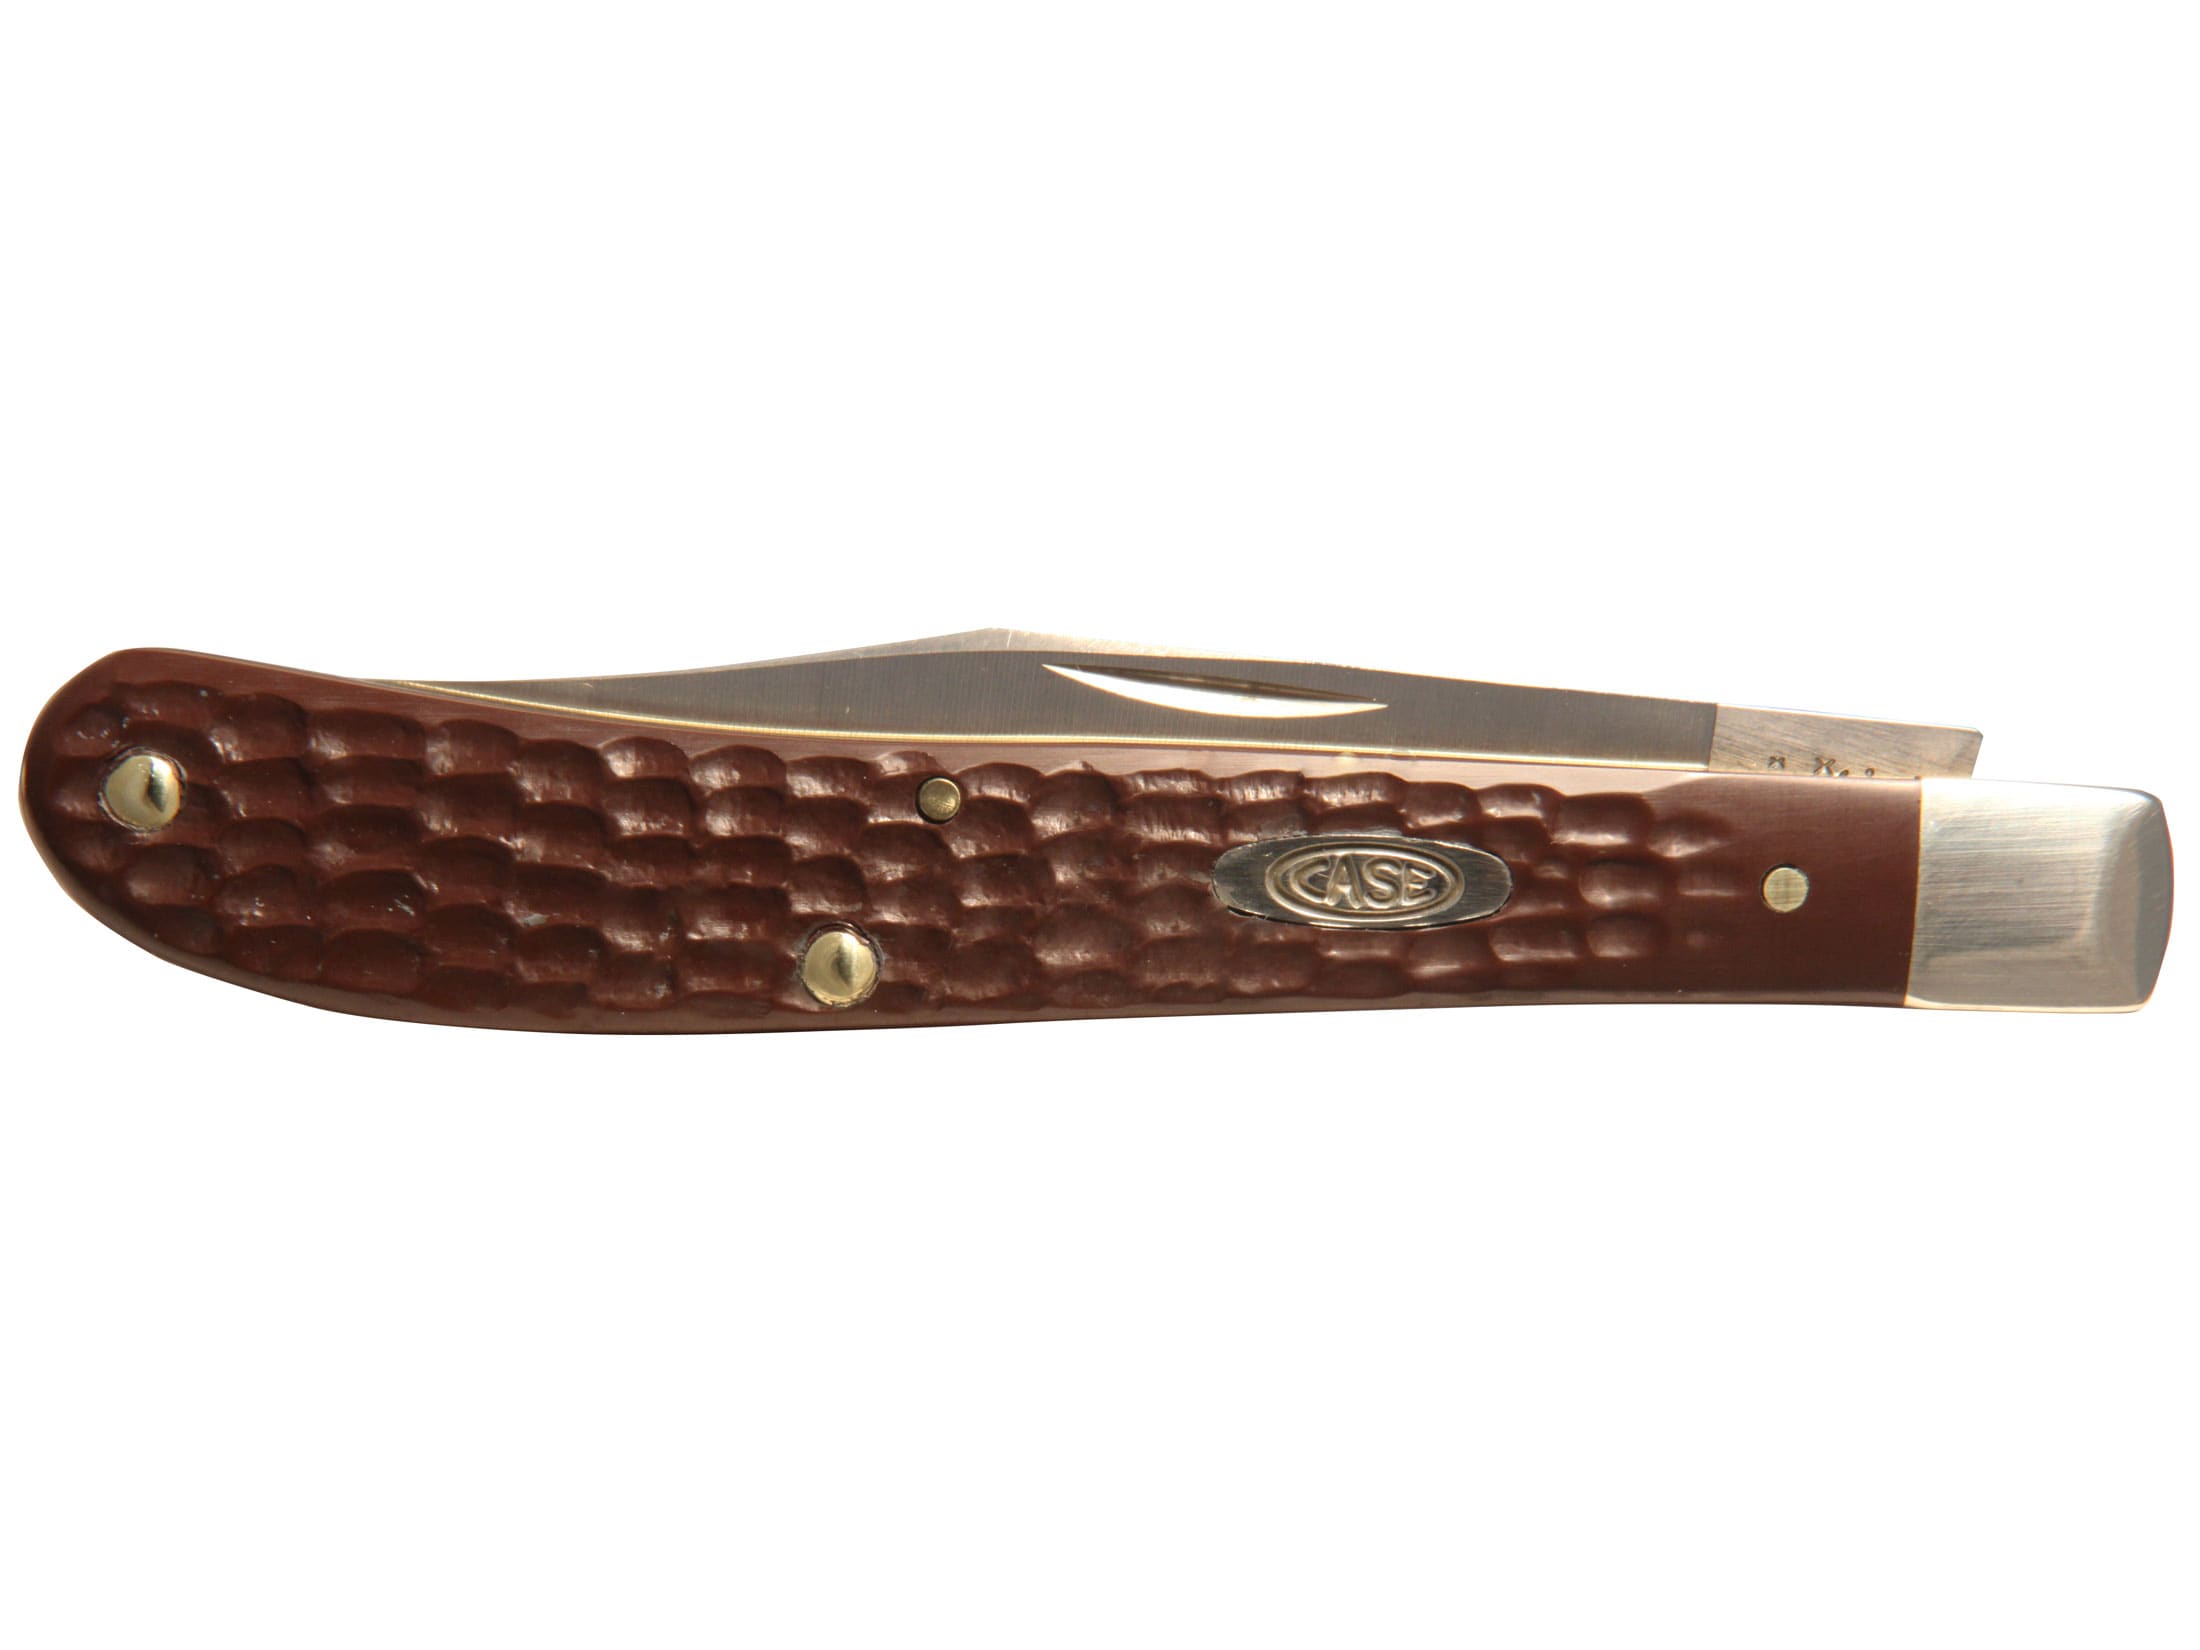 Case Working Barehead Slimline Trapper Folding Knife 3.25″ Clip Point Stainless Steel Blade Jigged Brown Brown Synthetic Handle For Sale